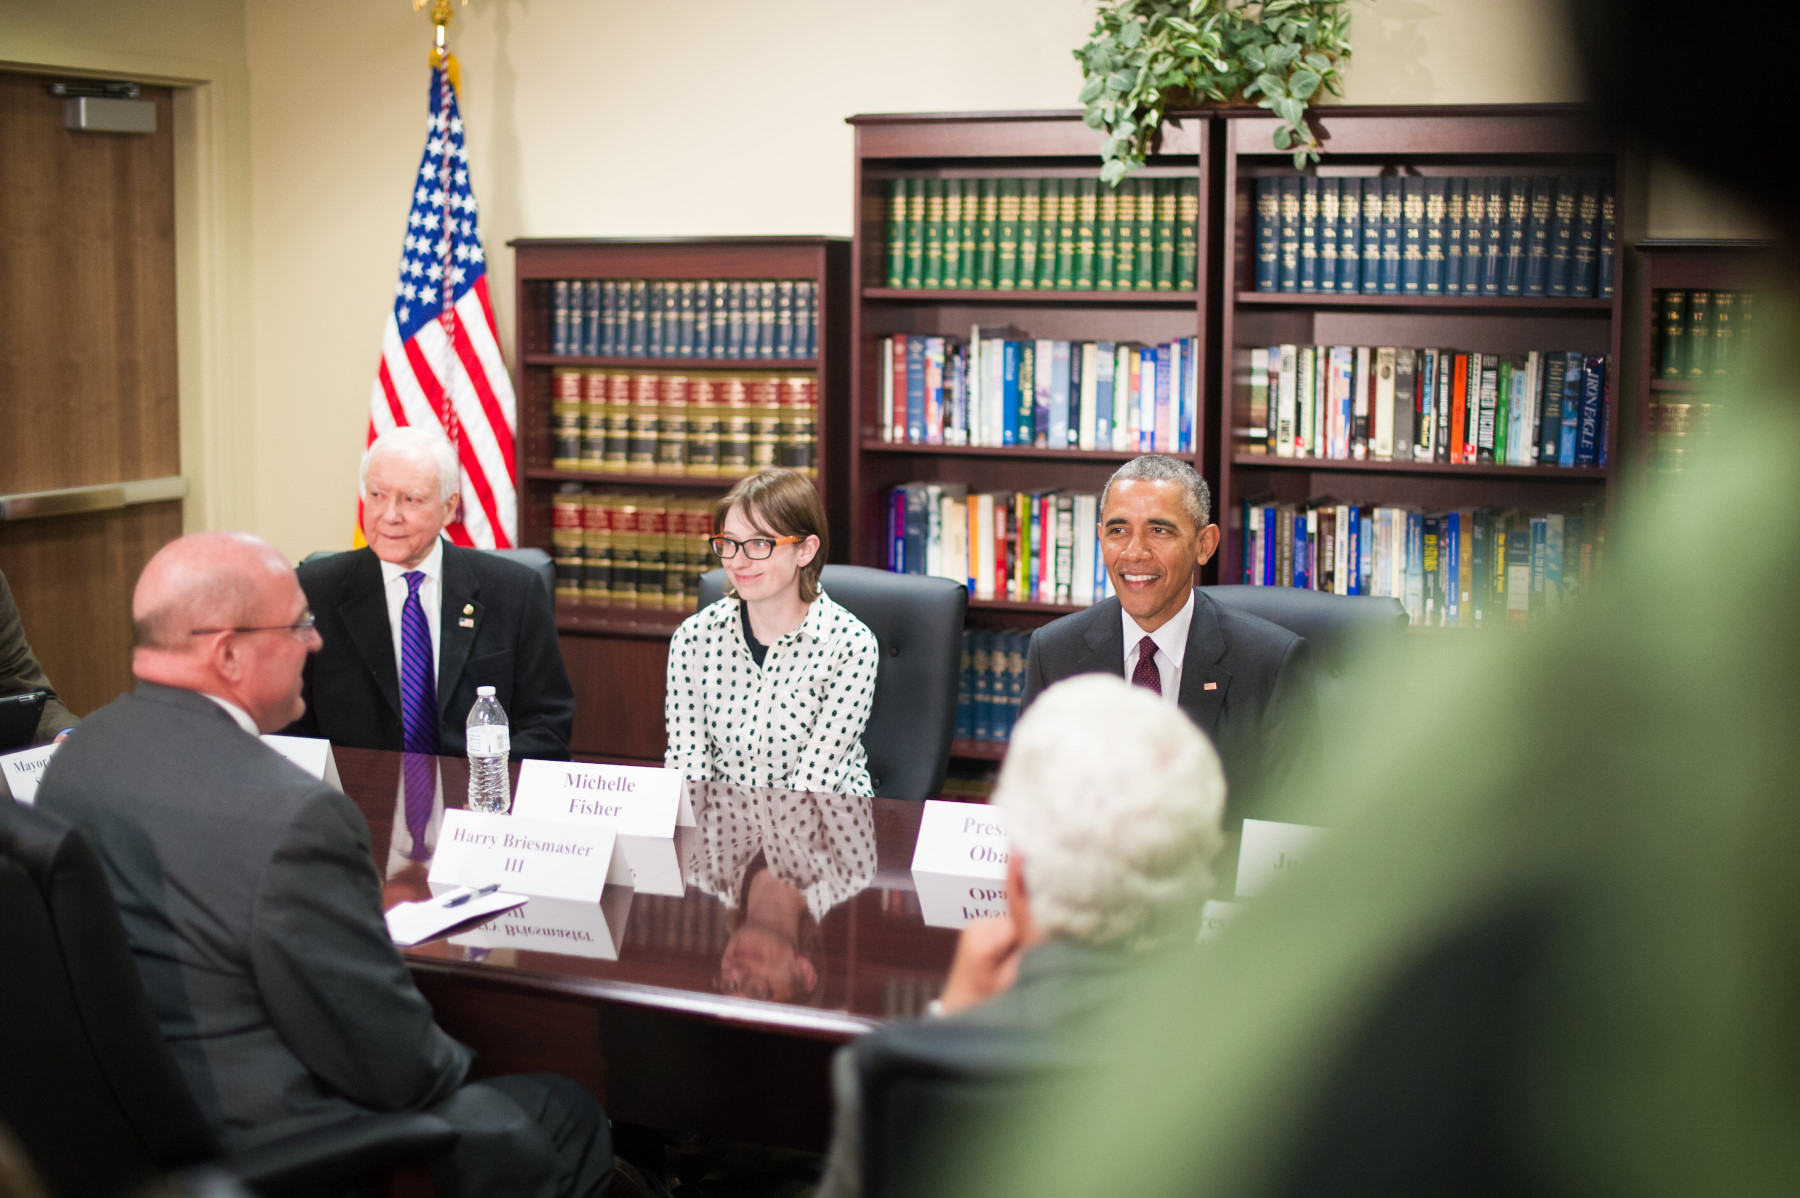 SLCC energy management student and Air Force veteran Michelle Fisher, seated next to Utah Sen. Orrin Hatch, meets with President Barack Obama during his first visit to Utah. (Photo: Dave Newkirk)